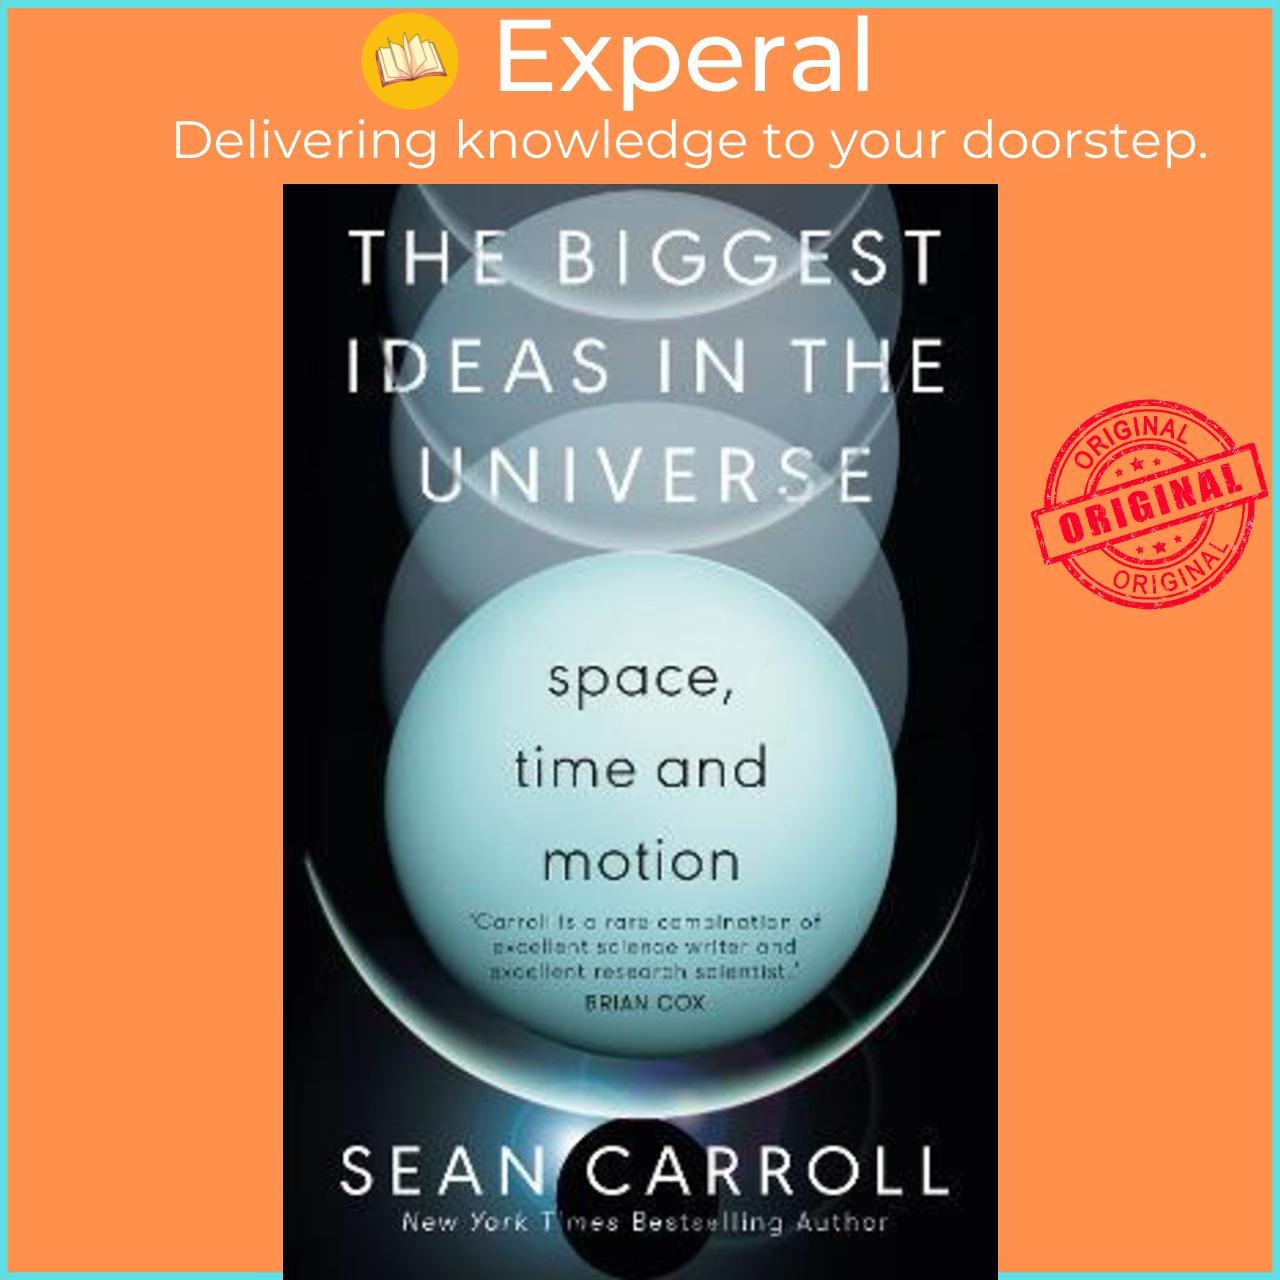 Sách - The Biggest Ideas in the Universe 1 : Space, Time and Motion by Sean Carroll (UK edition, hardcover)